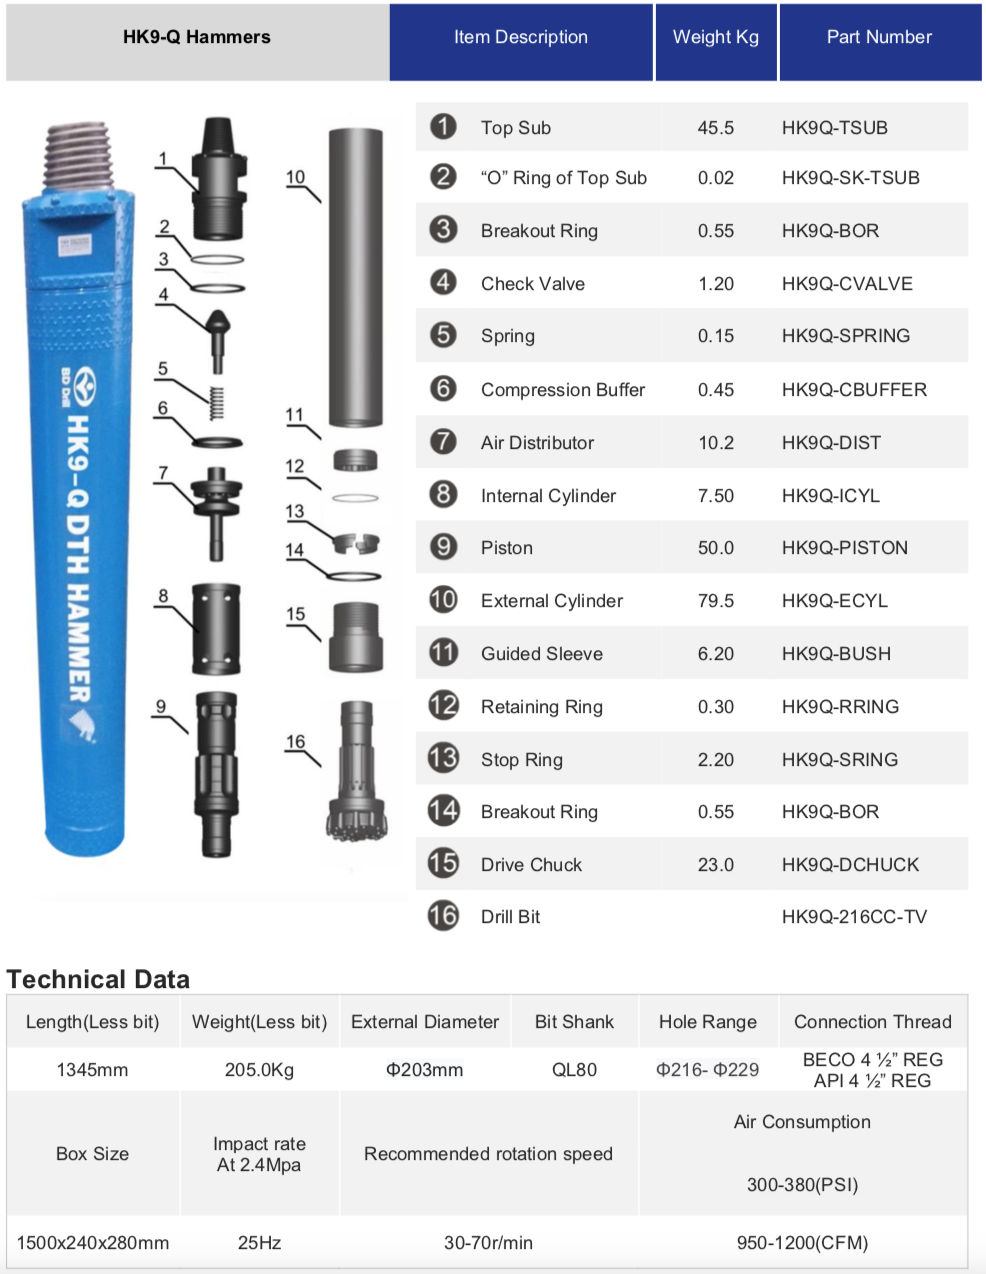 Black Diamond Drilling HK9-Q DTH Down the Hole Hammer schematic parts list and technical data